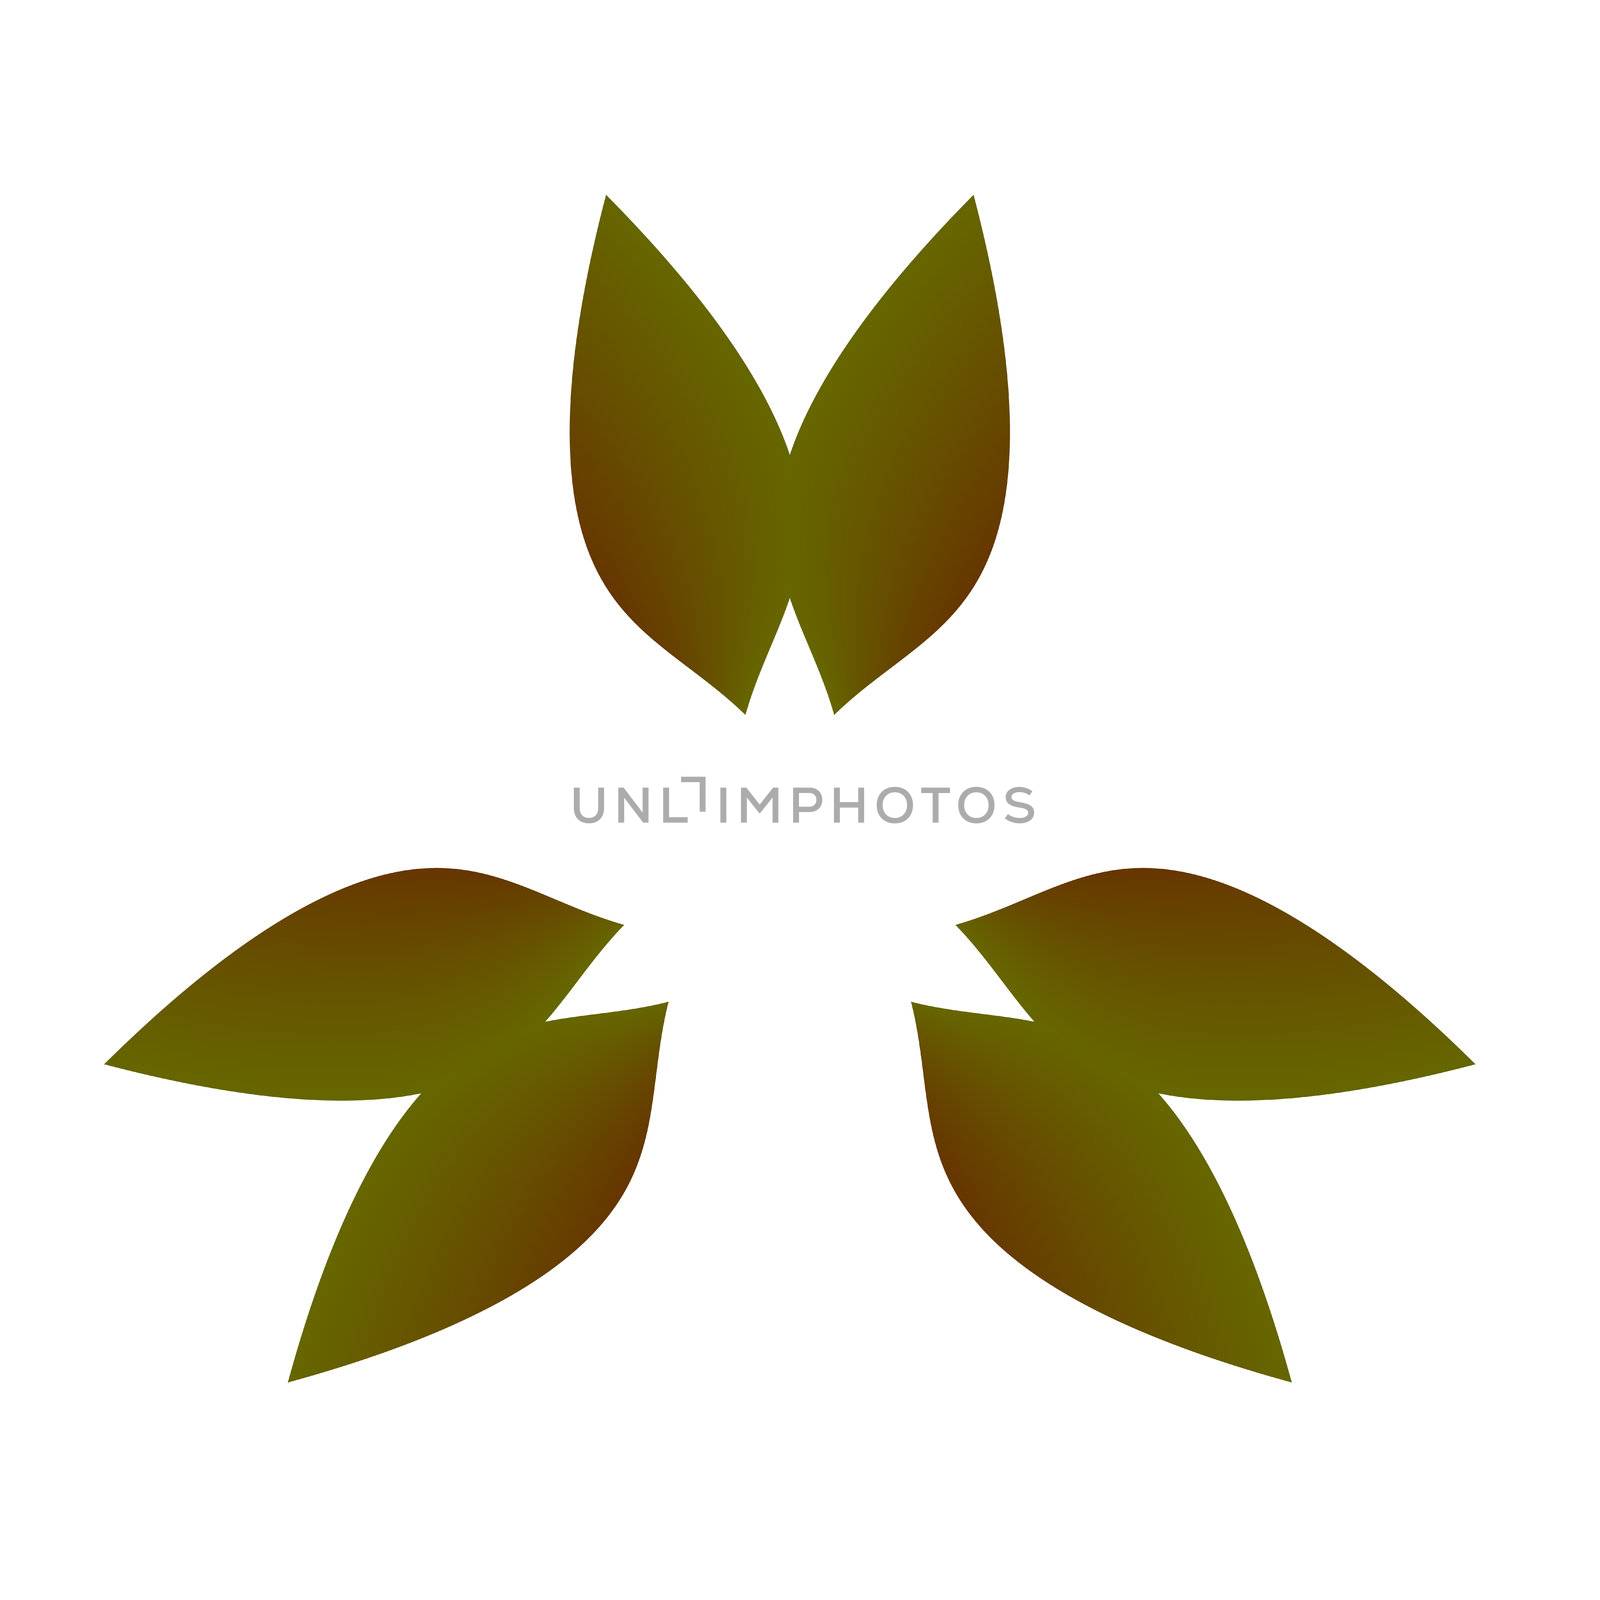 An abstract illustration of green leaves around a triangle floating on a white background